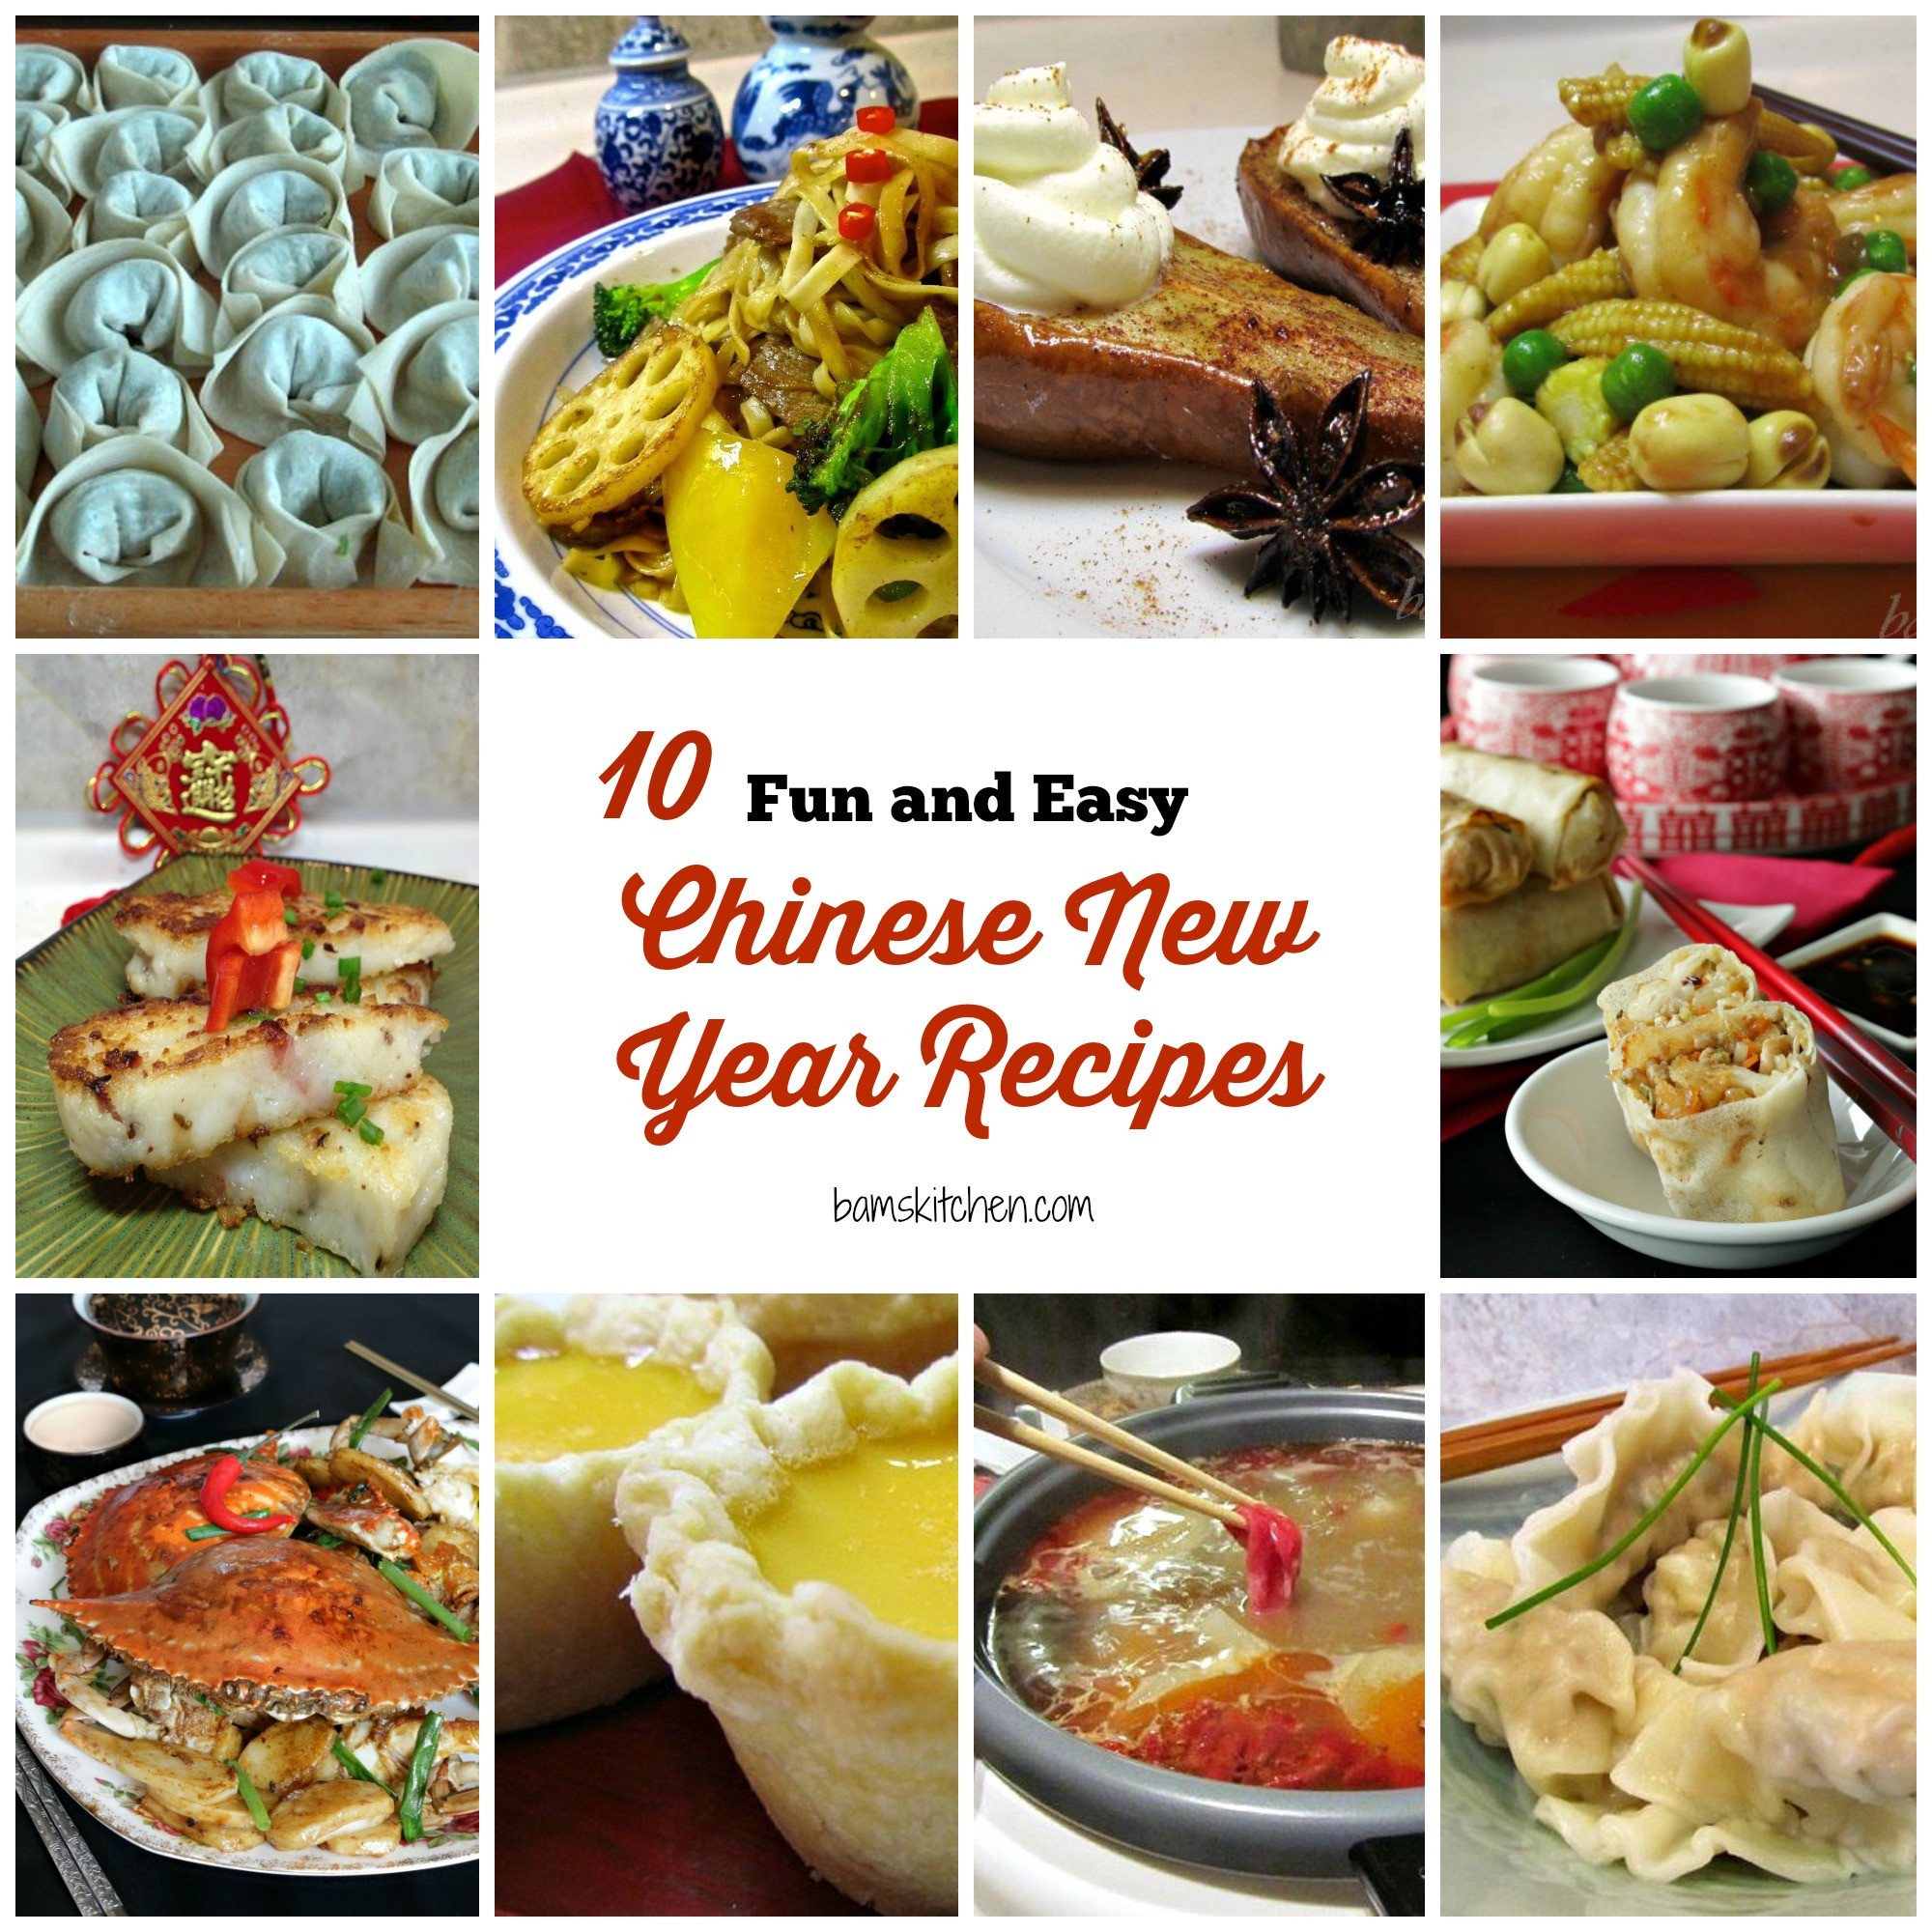 Healthy Chinese Recipes
 10 Fun and Easy Chinese New Year Recipes Healthy World